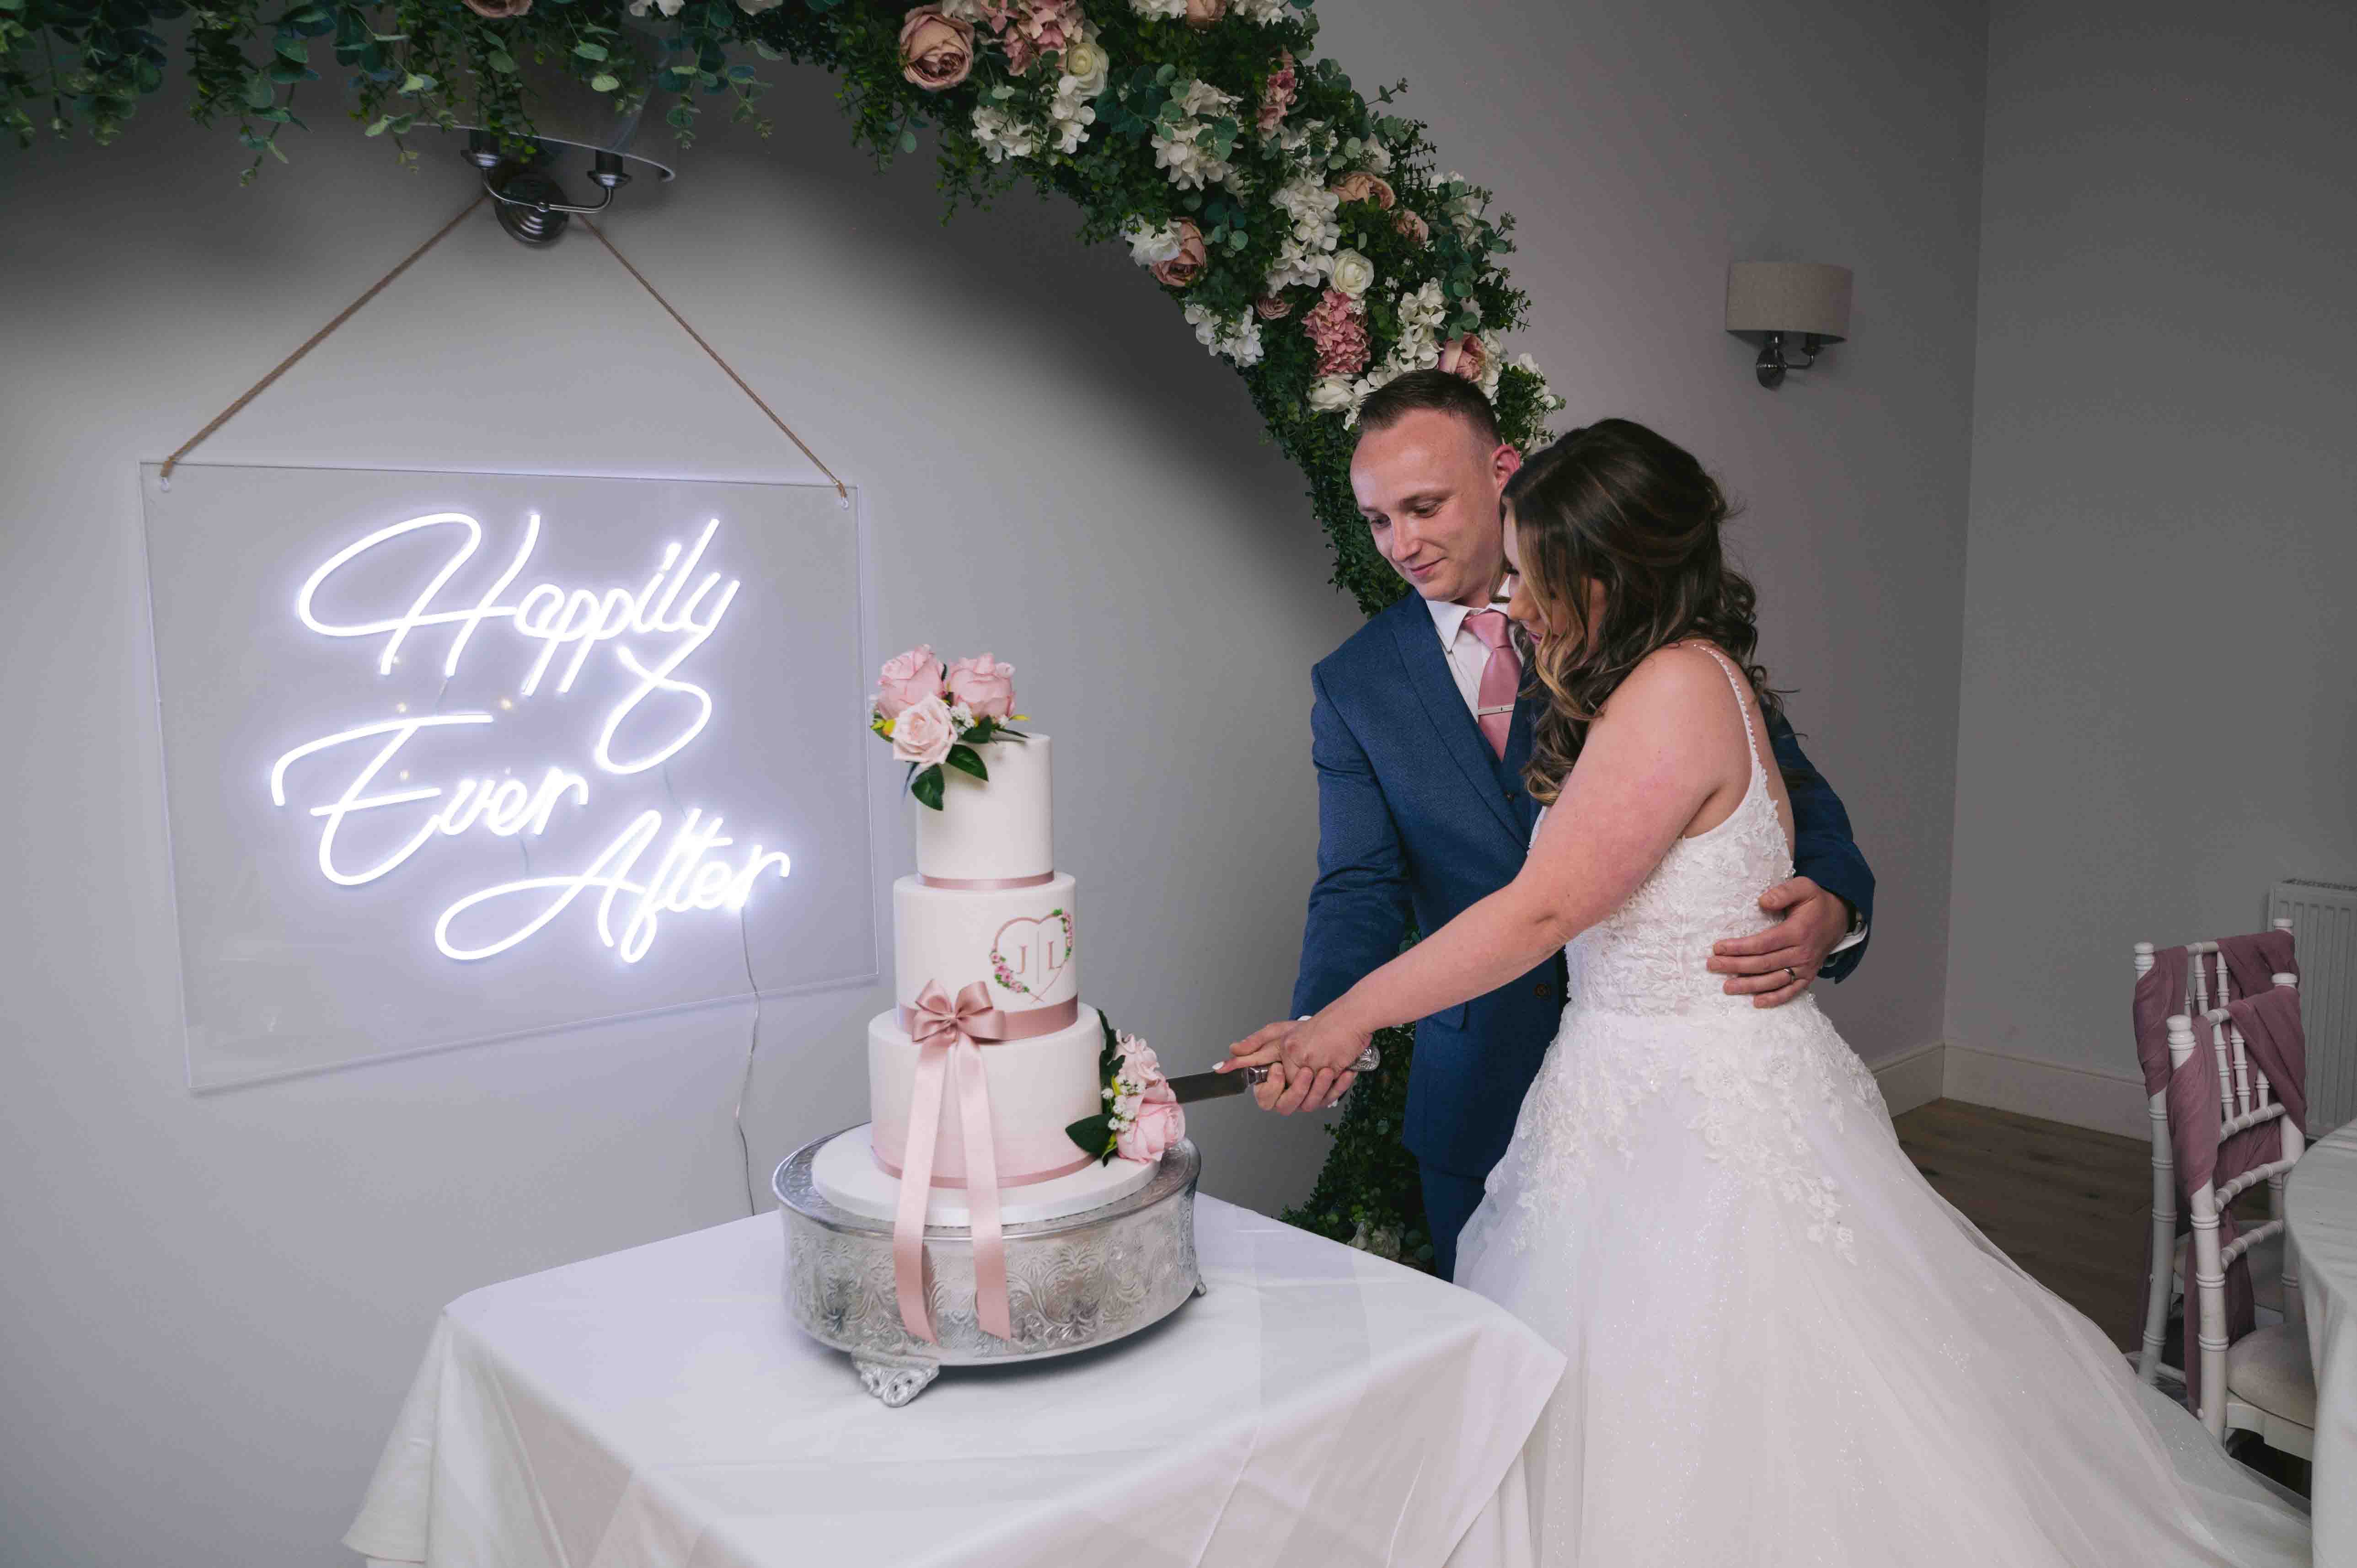 Bride & Groom cut wedding cake in front of a neon sign at Highfield Hall